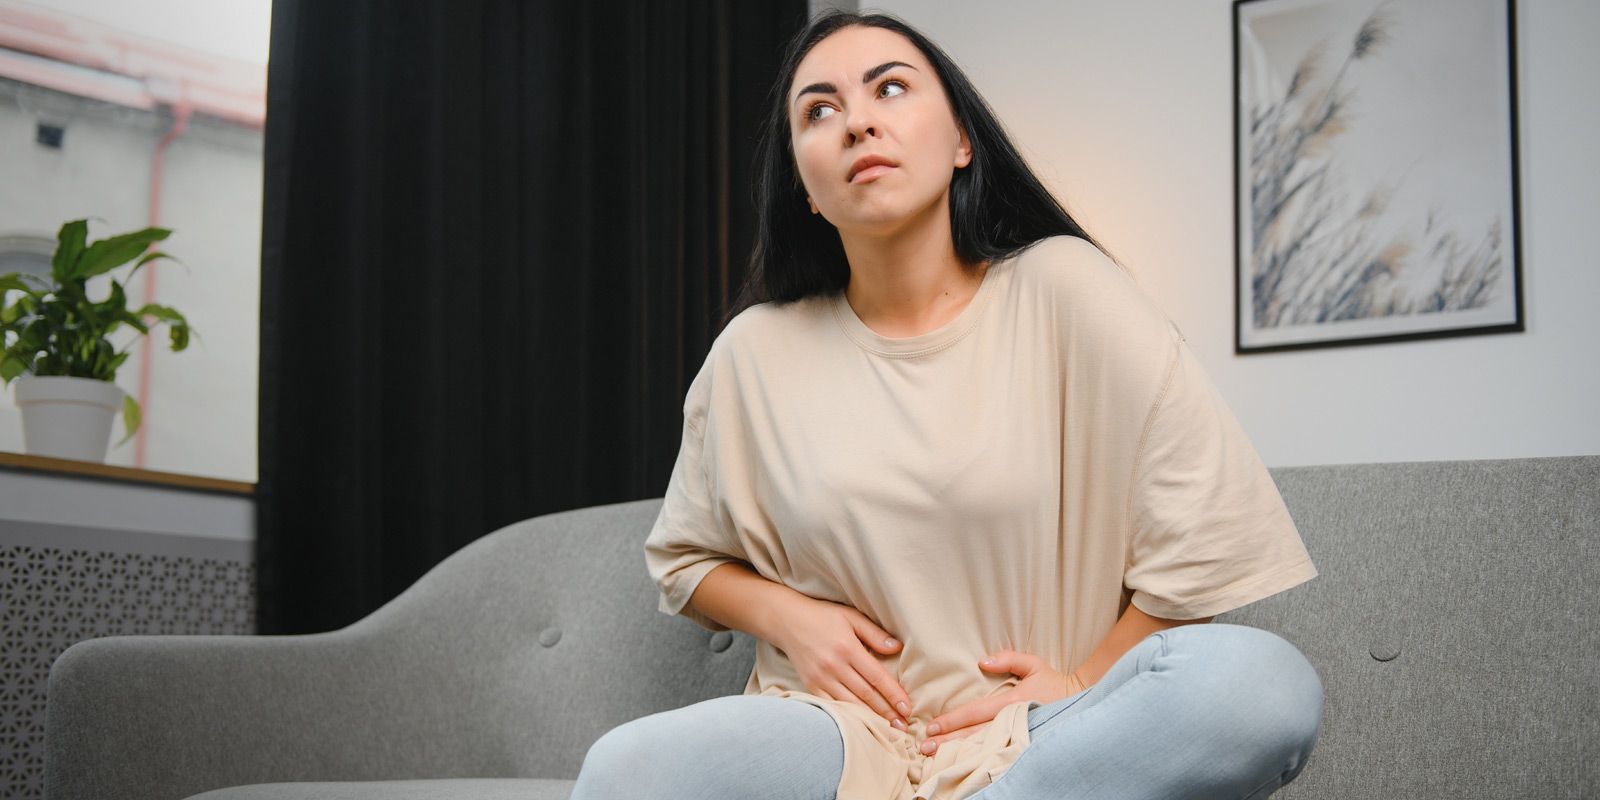 IBS Remedies NYC - Dr. Alicia Armitstead. Natural Remedies for Irritable Bowel Syndrome at the Healing Arts NYC Health and Wellness Center in Manhattan NY and Connecticut